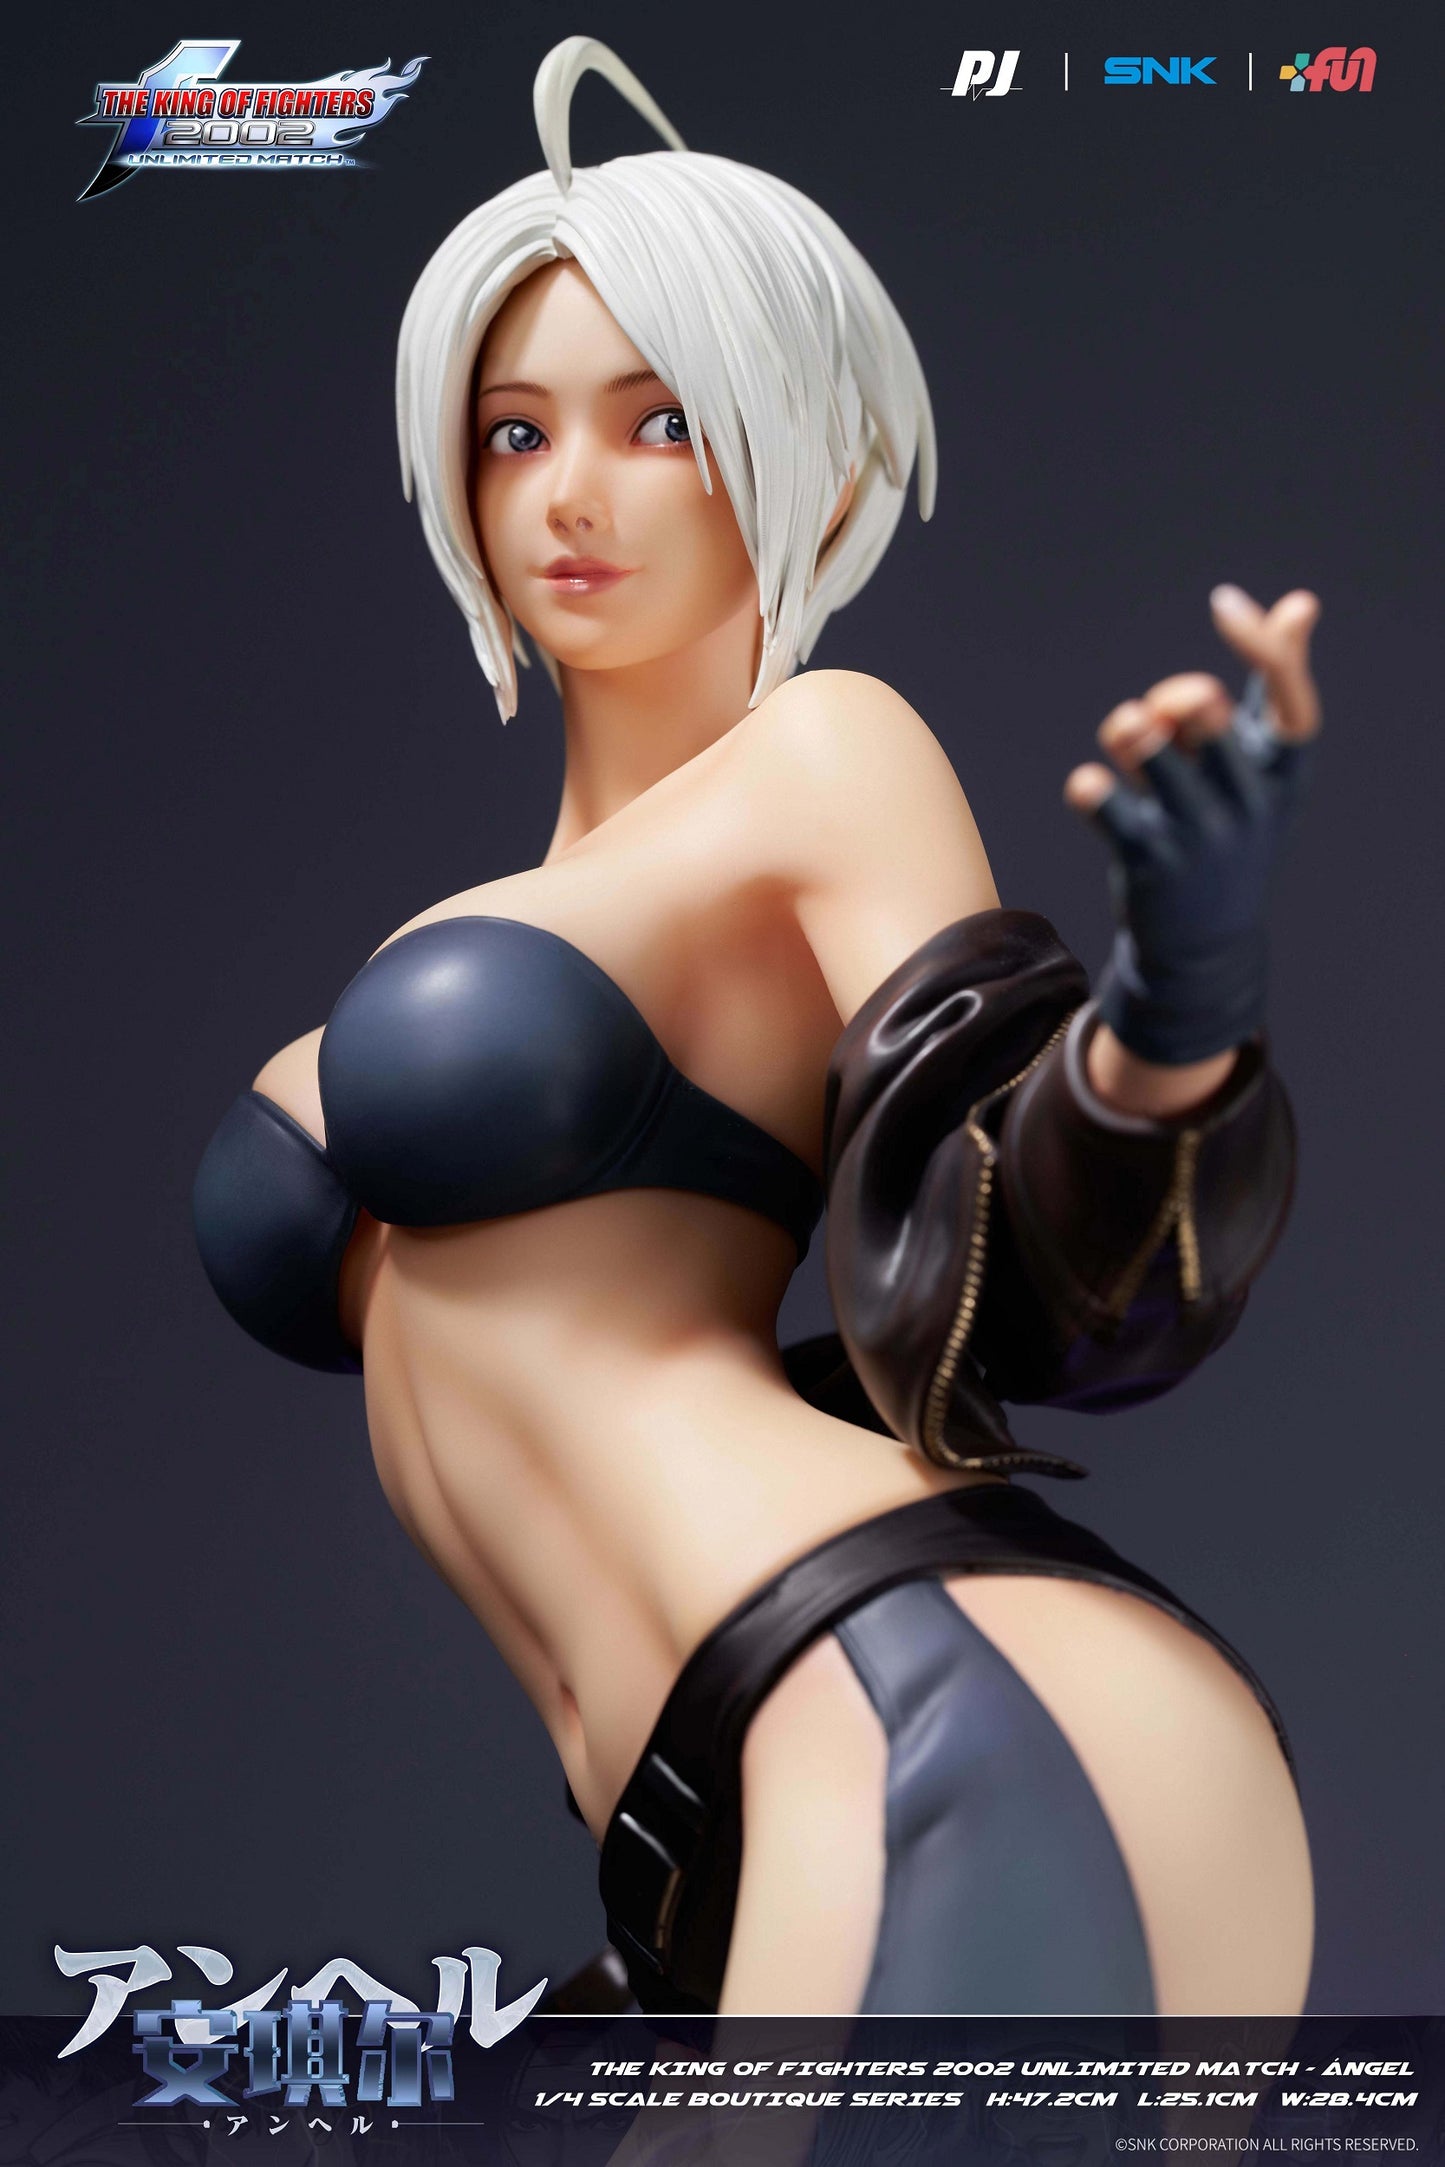 PIJI Studio - The King of Fighters 2002 Unlimited Match Angel (Licensed) [PRE-ORDER]